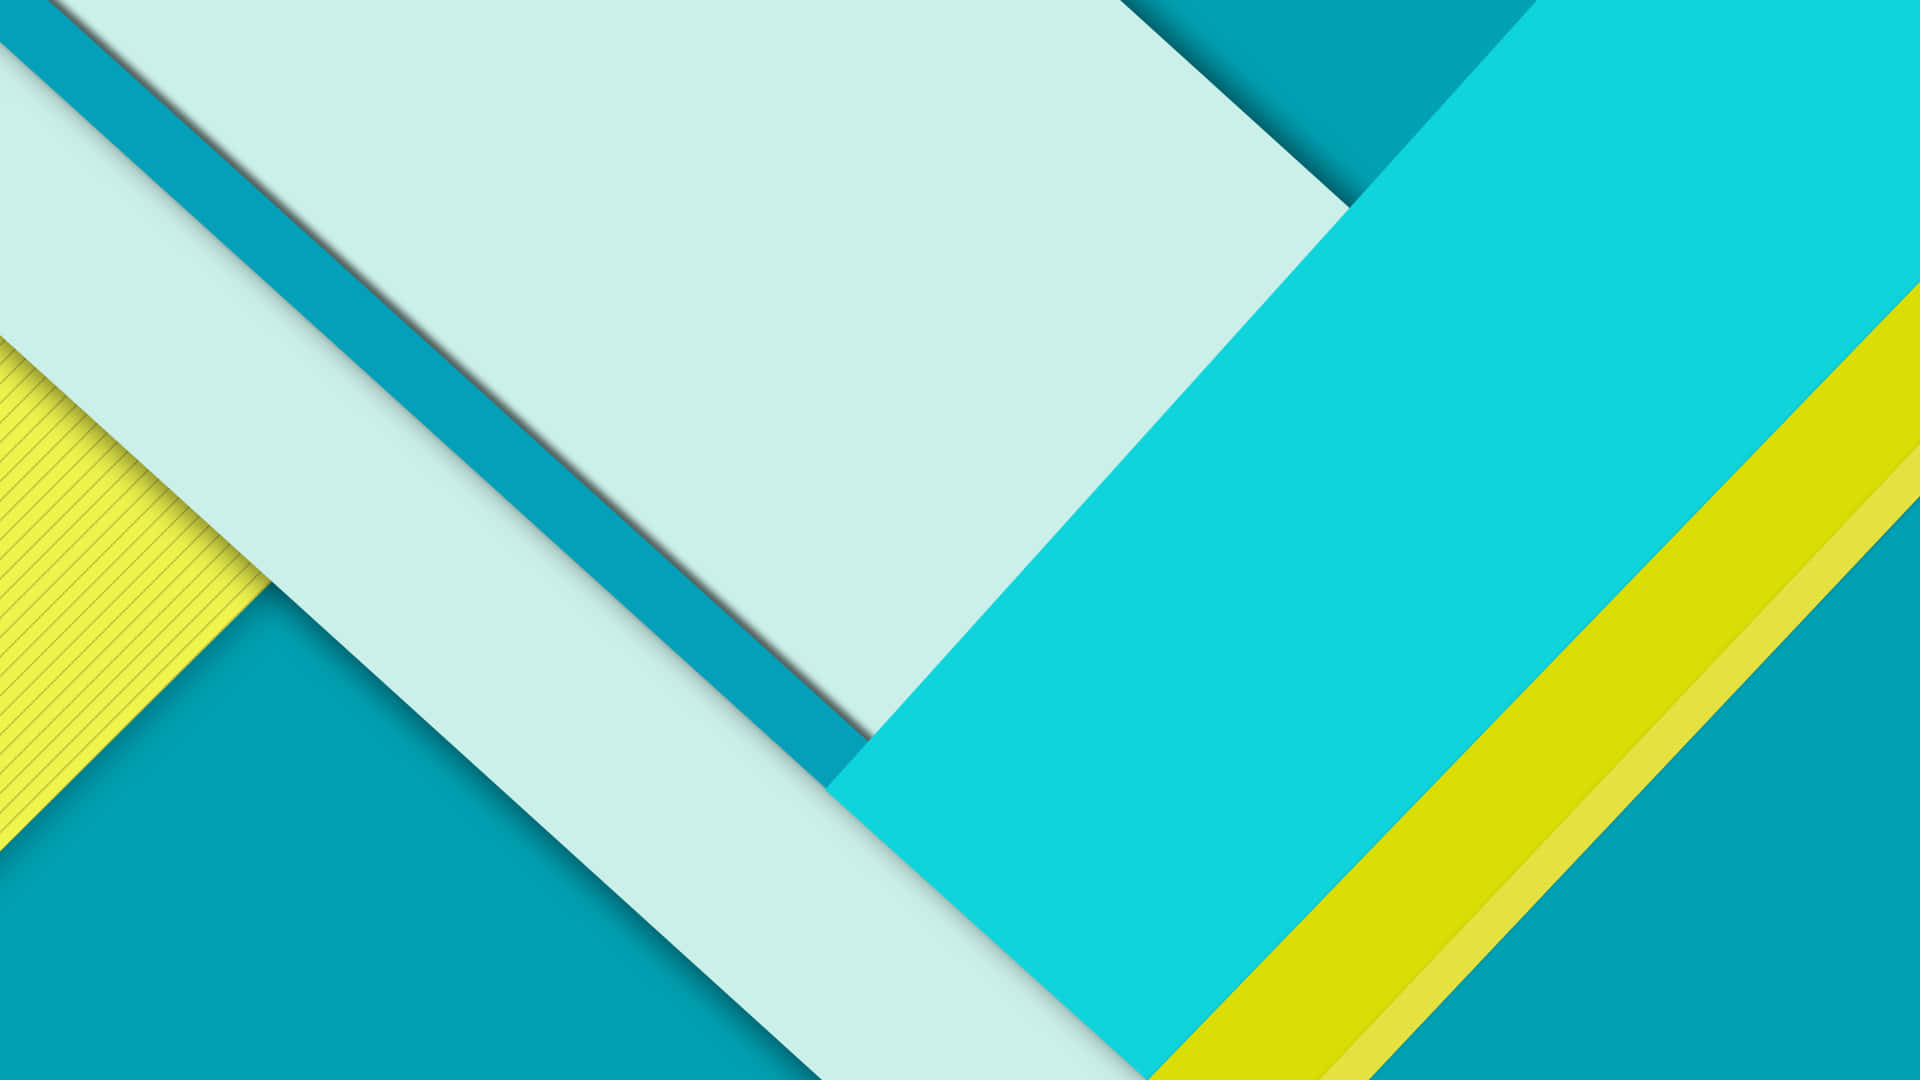 A stunning Material Design inspired background